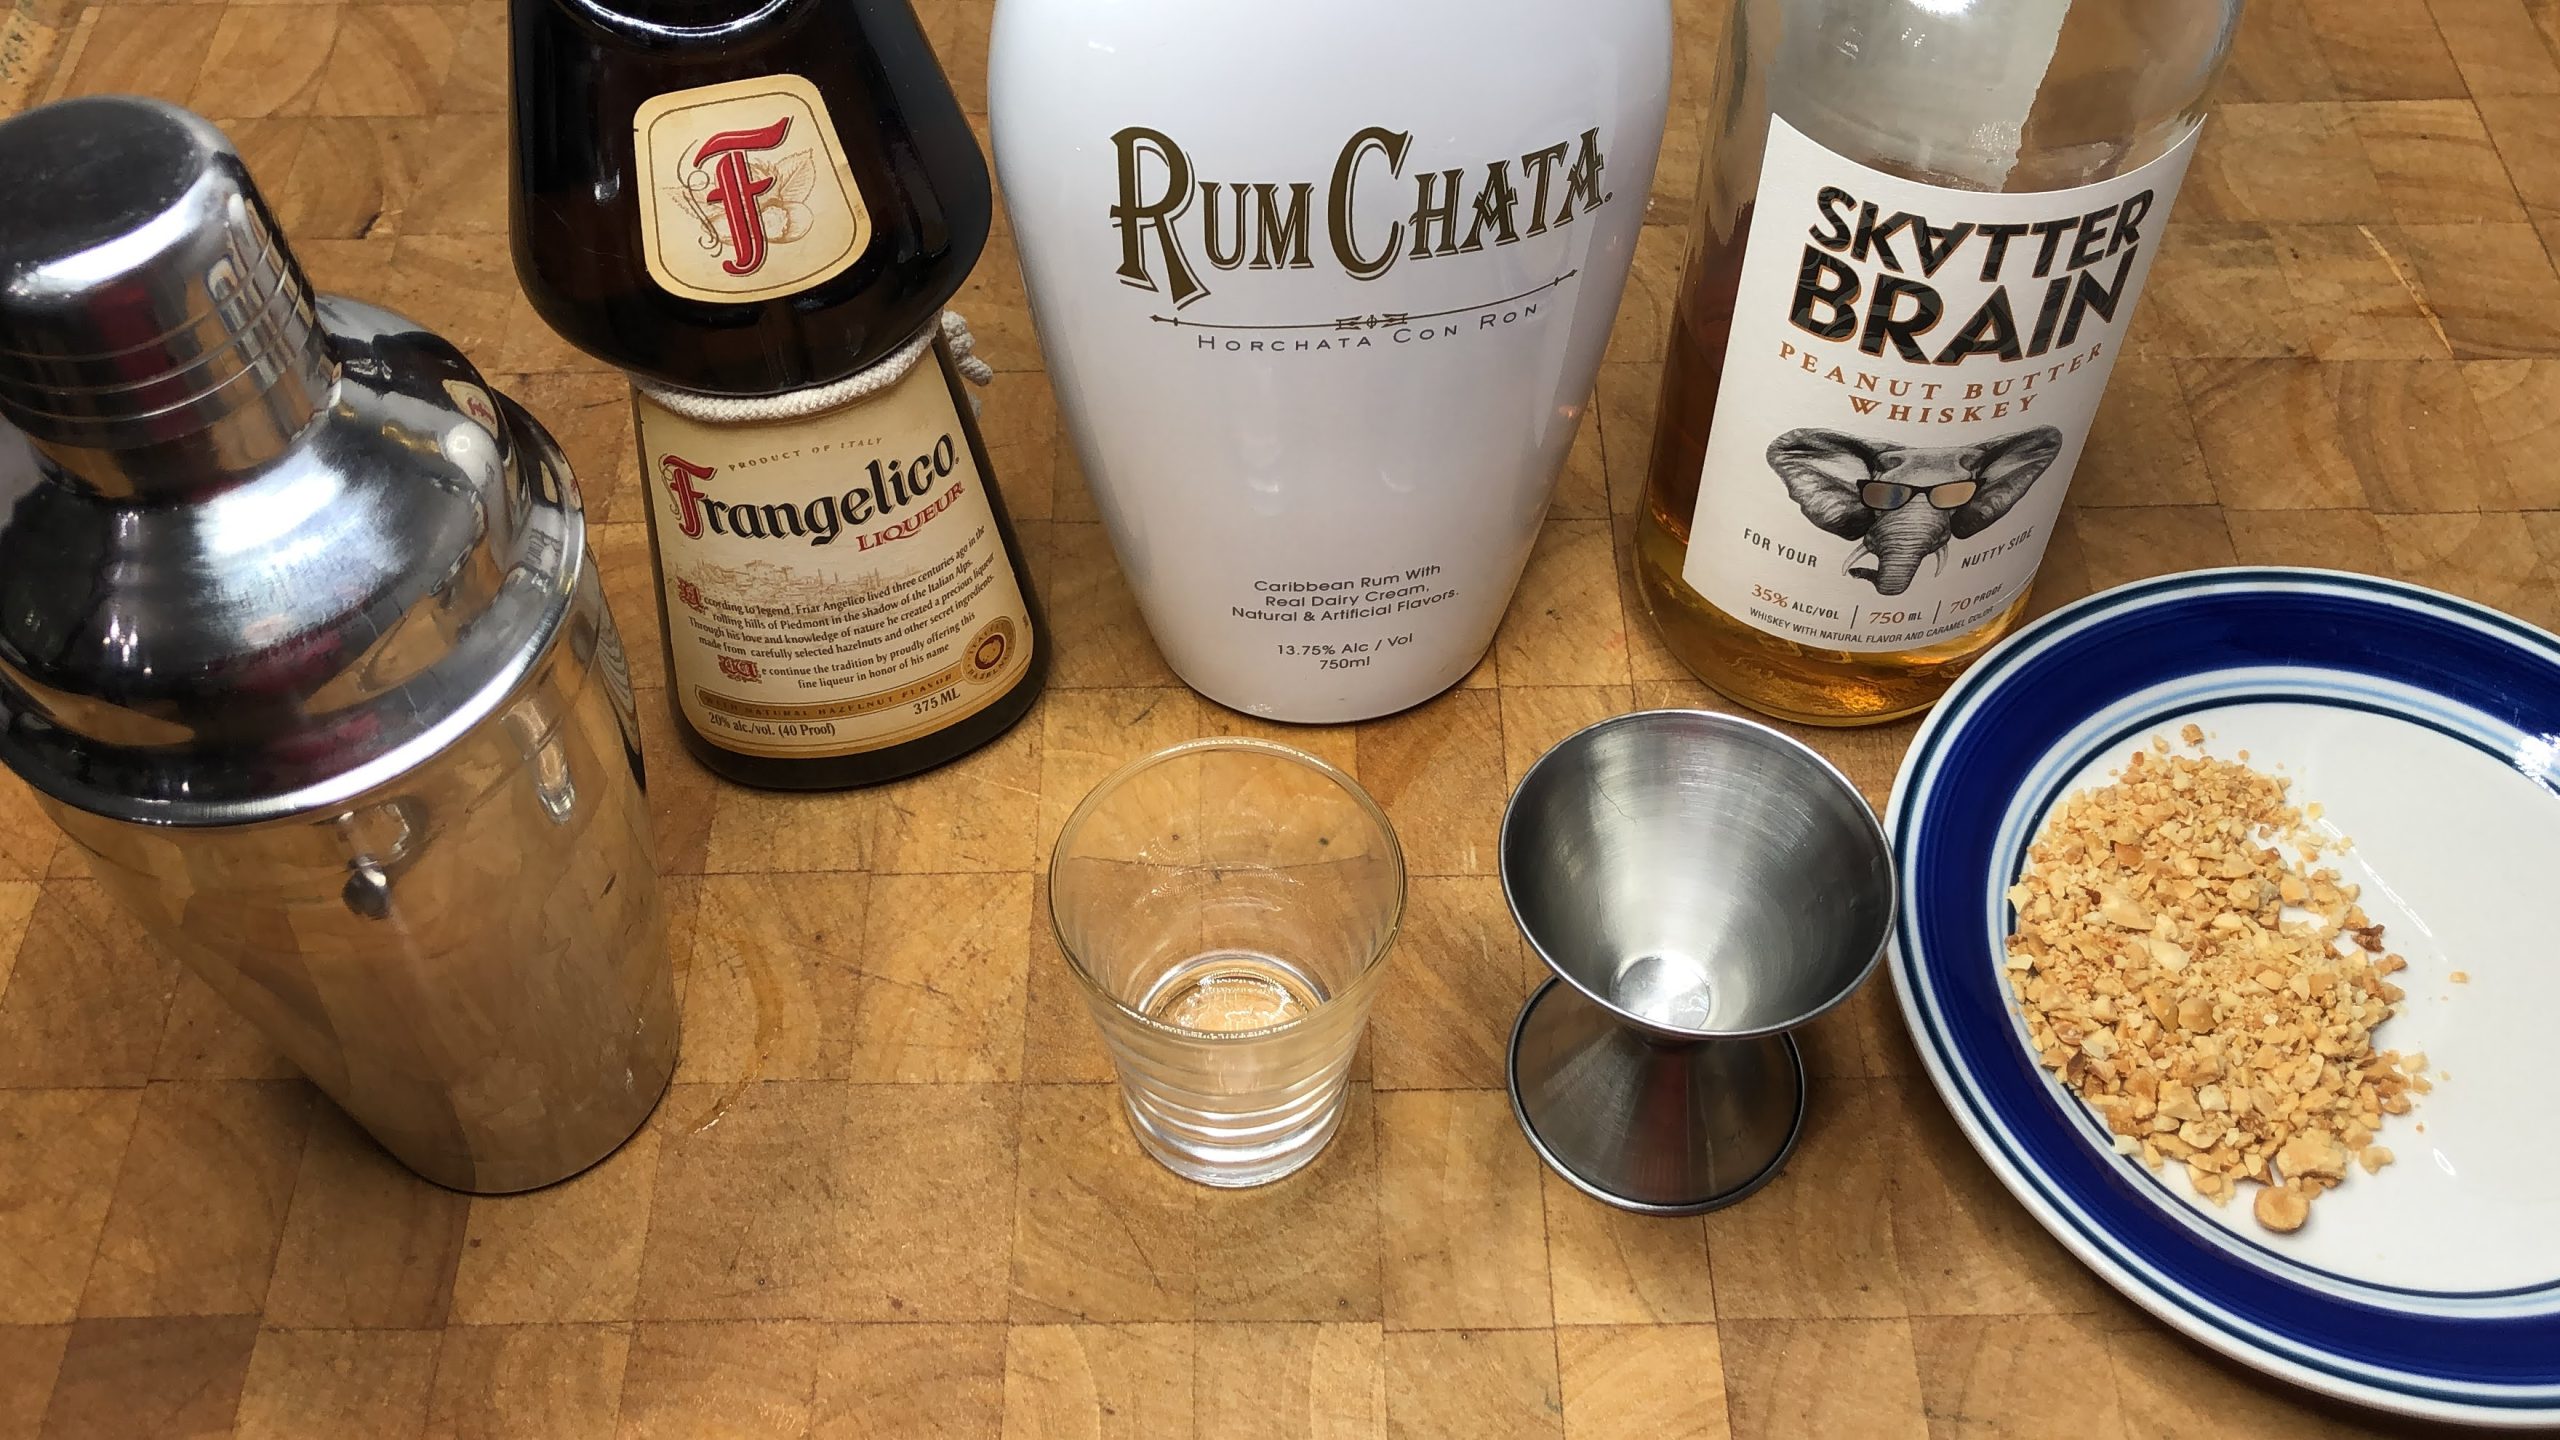 Frangelico, rumchata and peanut butter whiskey next to shot glass, jigger, shaker and saucer with crushed peanuts.